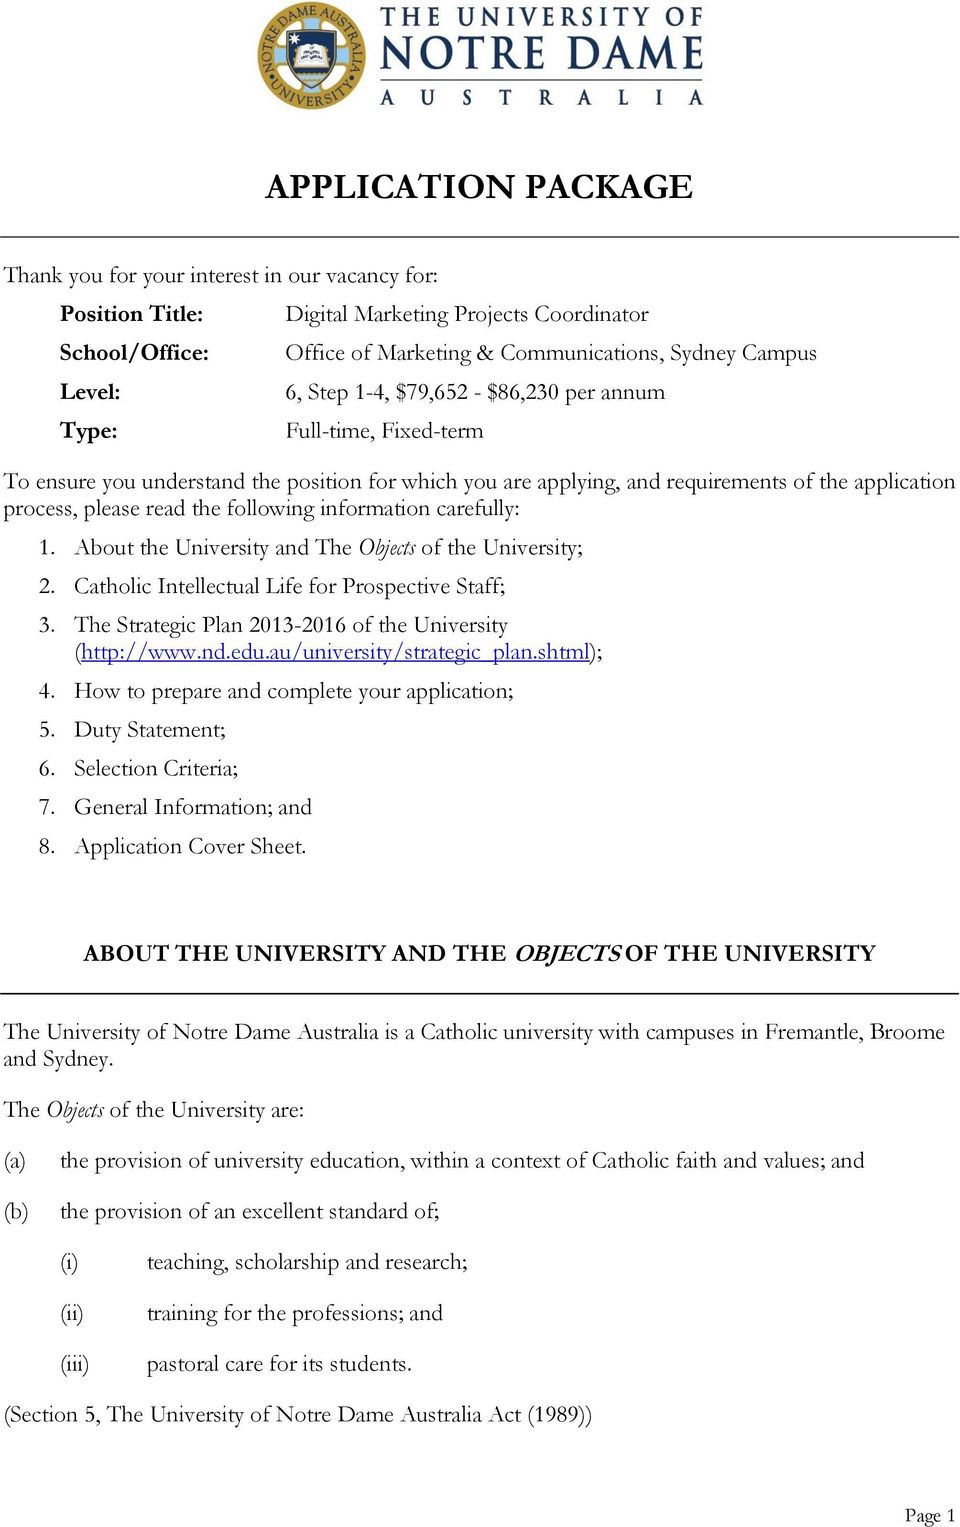 following information carefully: 1. About the University and The Objects of the University; 2. Catholic Intellectual Life for Prospective Staff; 3.